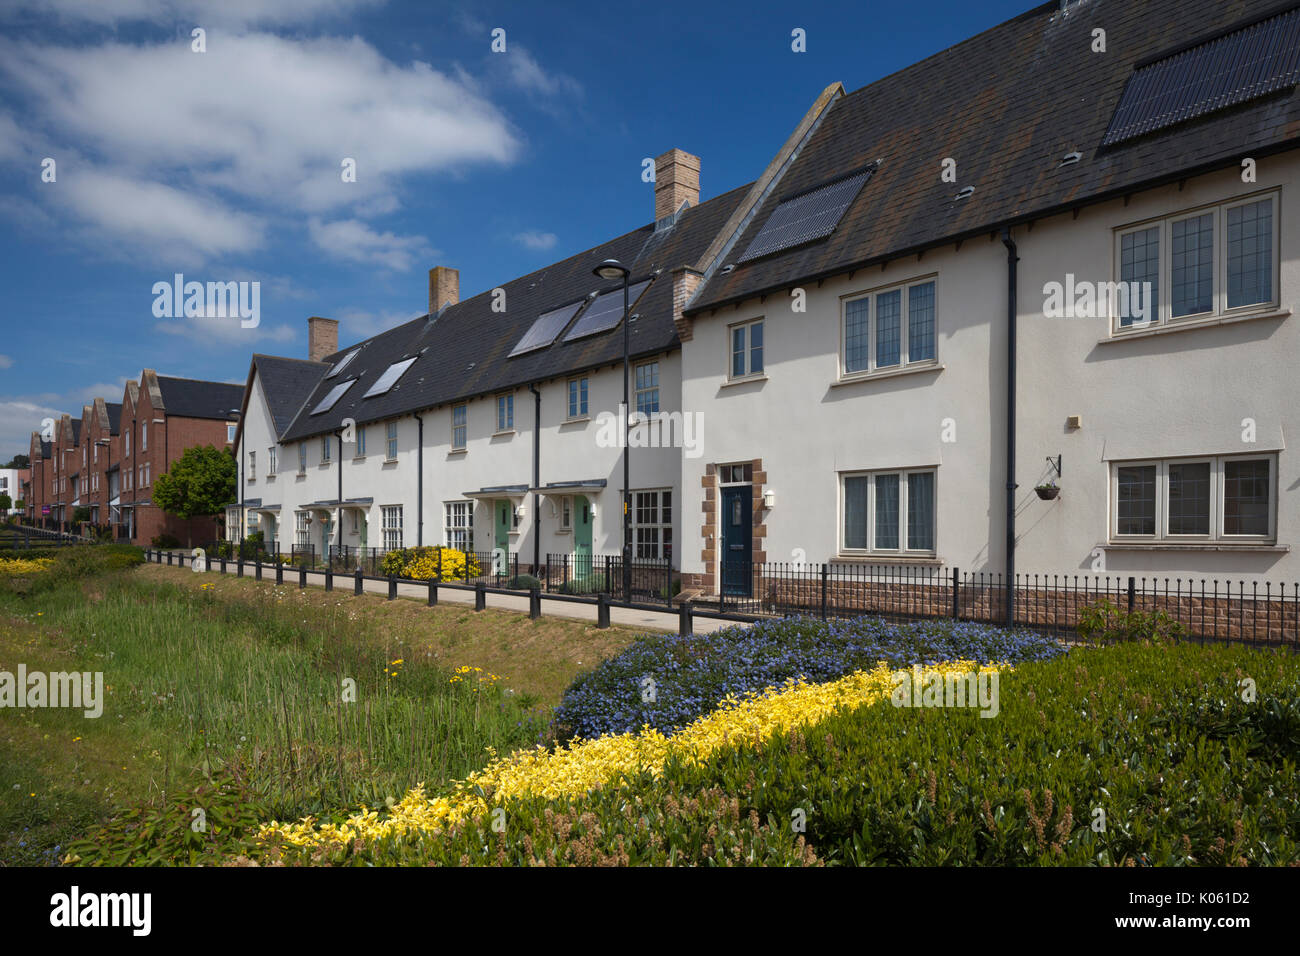 Modern terraced housing with solar panels on roof forming part of the modern Eco design development of Upton, a suburb of Northampton, England, UK Stock Photo